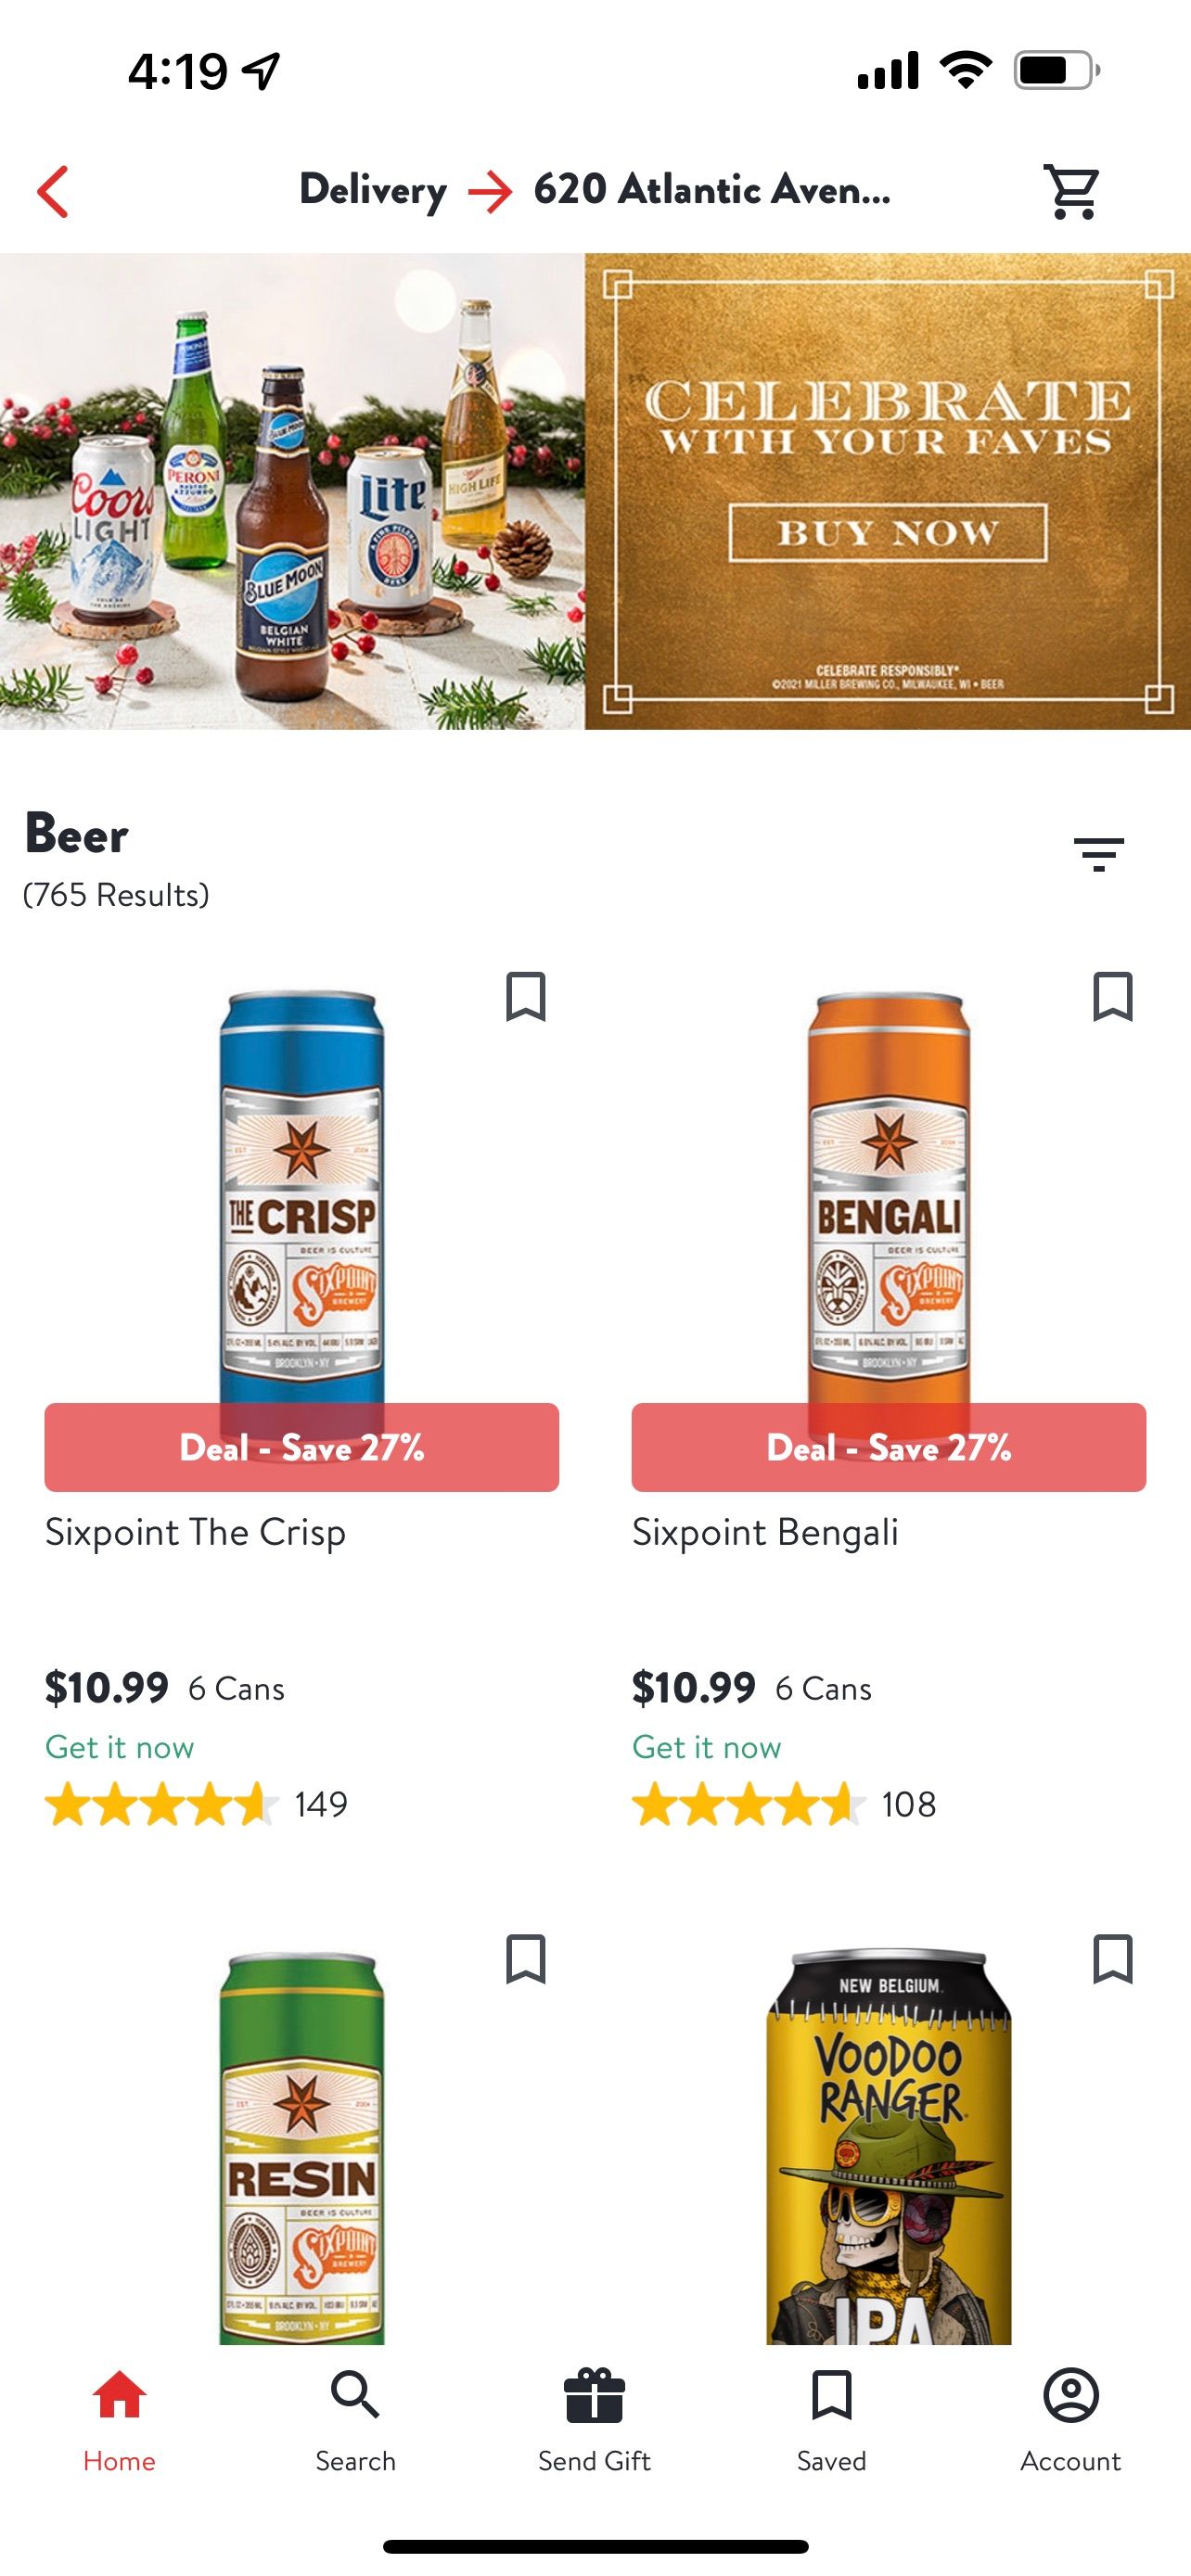 drizly local beer search results